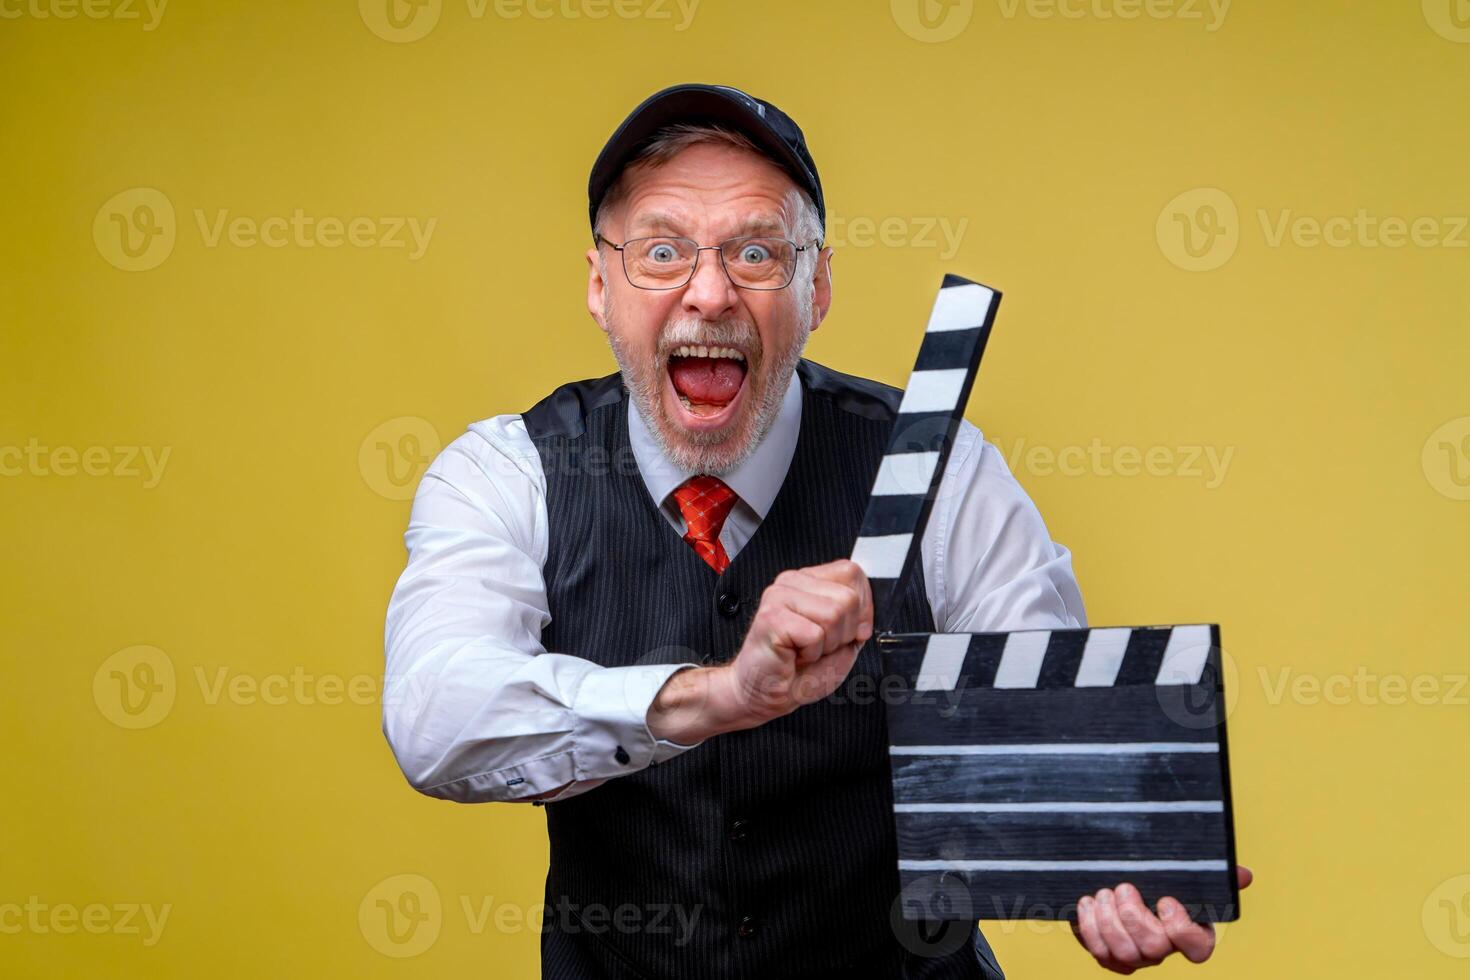 Senior man holds film flap close up. Film directing. Film production. Human emotions. Man with movie flap while filming photo